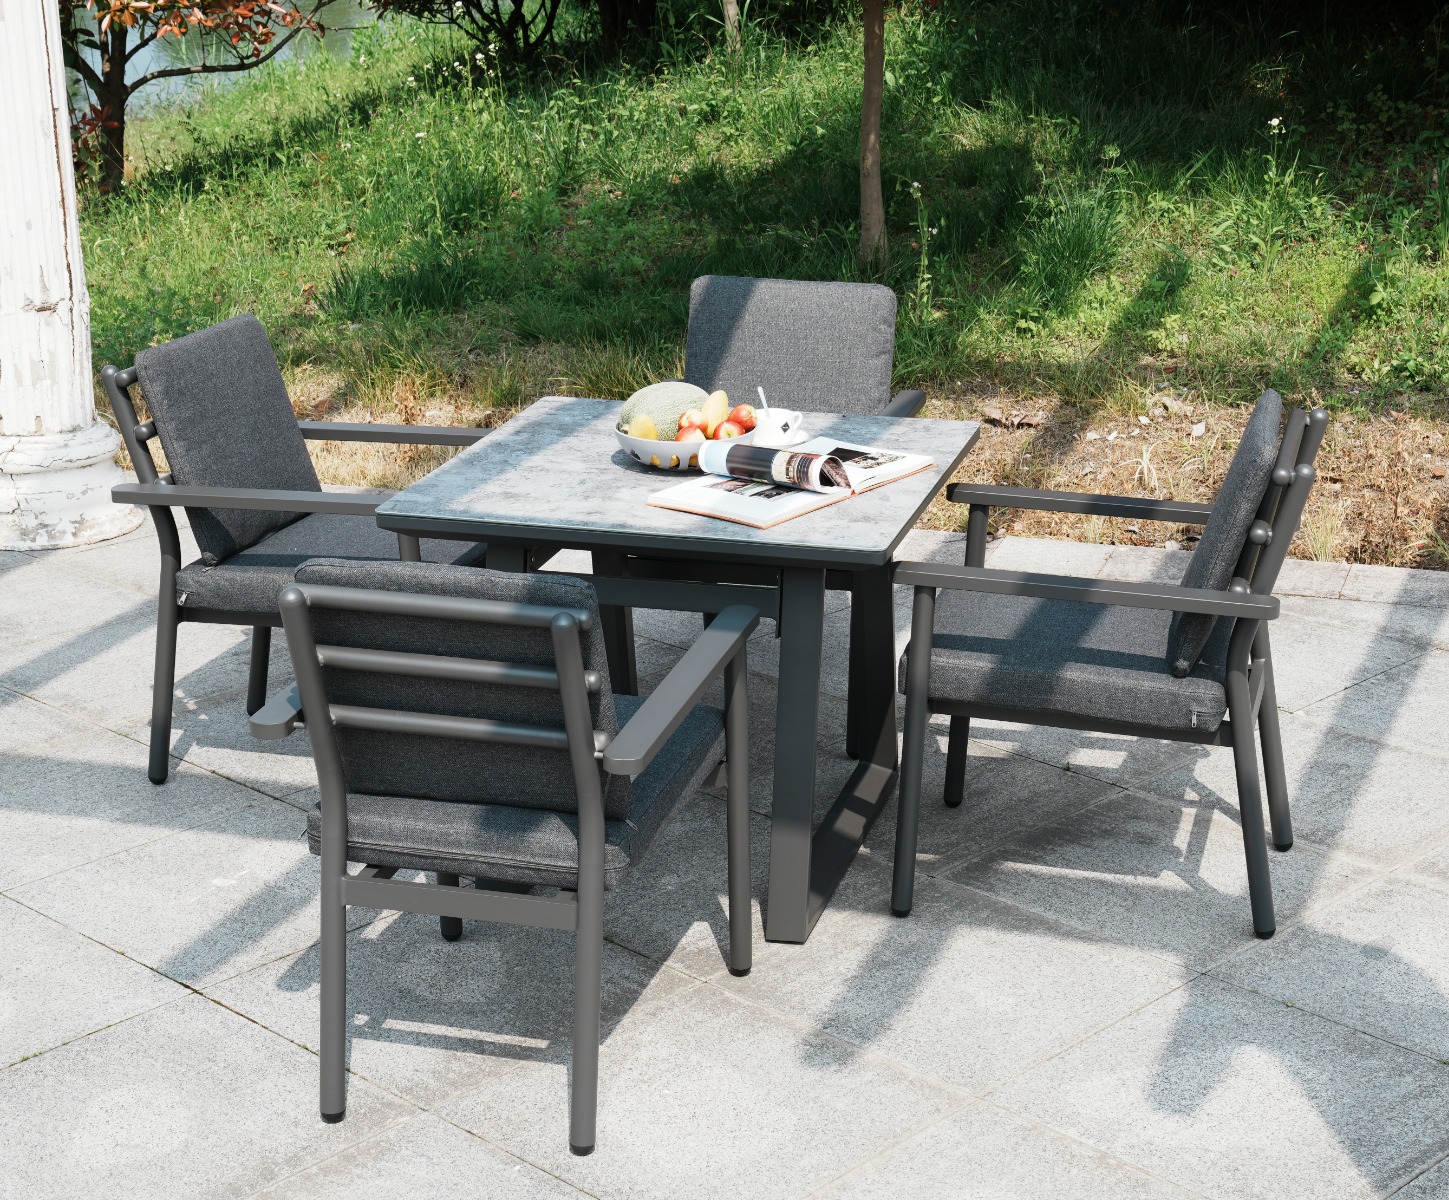 Deluxe Aluminium 4 Seat Dining Set with Patterned Table Top